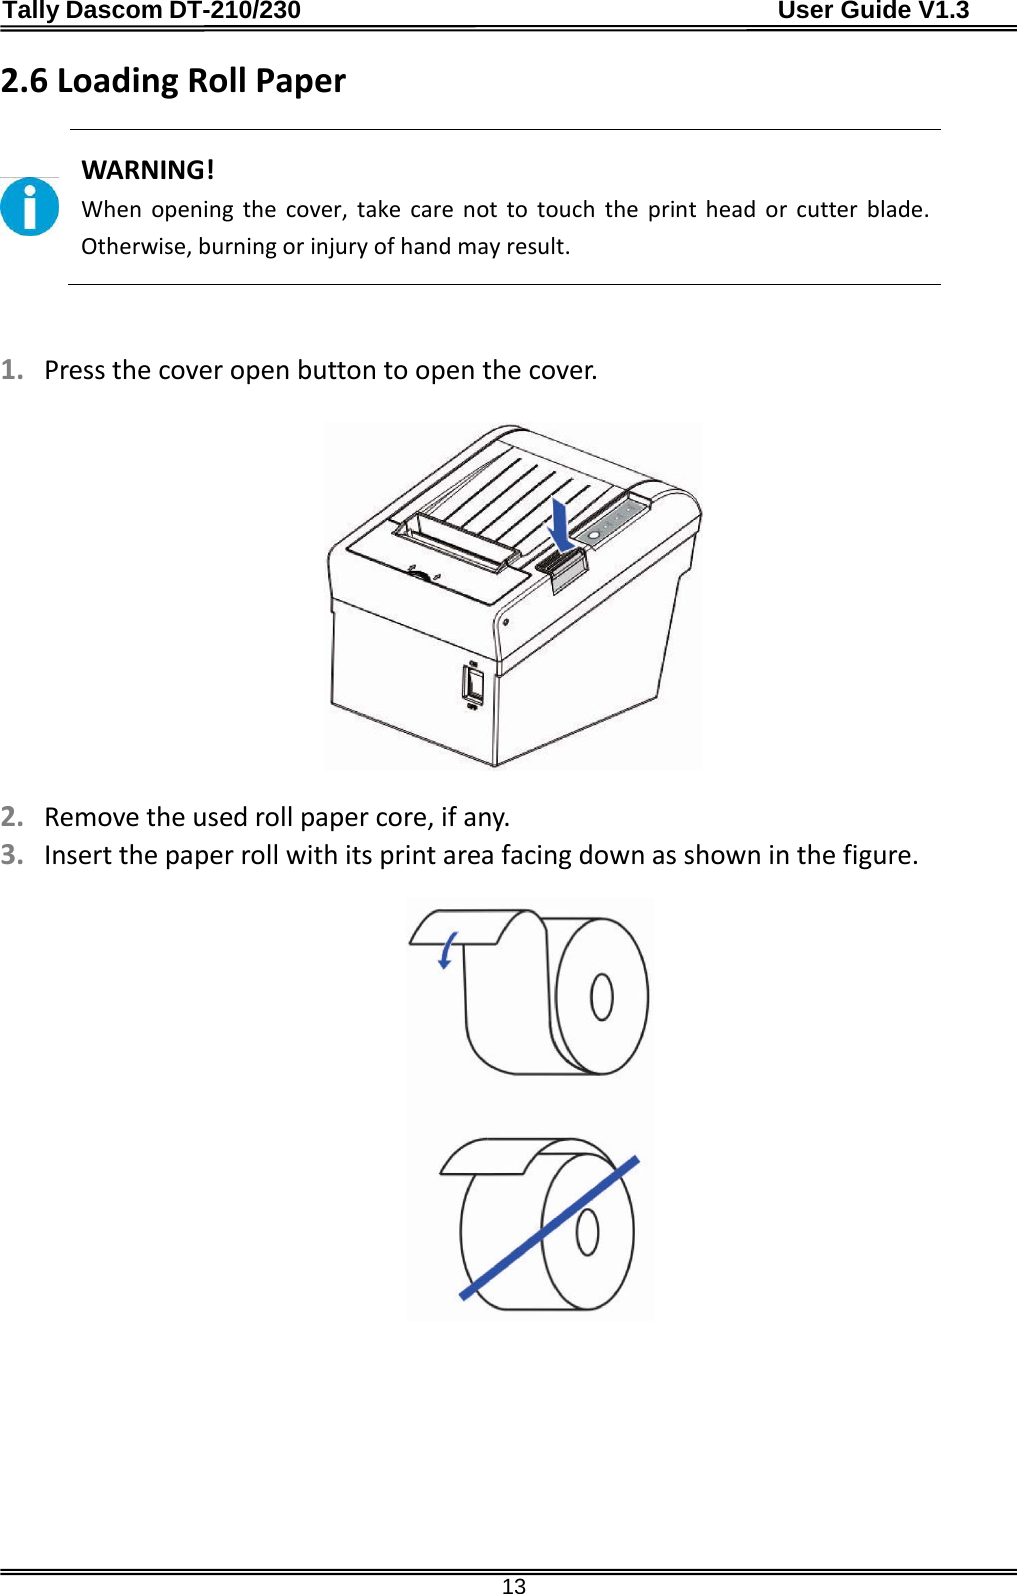 Tally Dascom DT-210/230                                      User Guide V1.3  13 2.6 Loading Roll Paper   WARNING! When  opening the cover, take care not to touch the print head or cutter blade. Otherwise, burning or injury of hand may result.   1. Press the cover open button to open the cover.    2. Remove the used roll paper core, if any. 3. Insert the paper roll with its print area facing down as shown in the figure.    